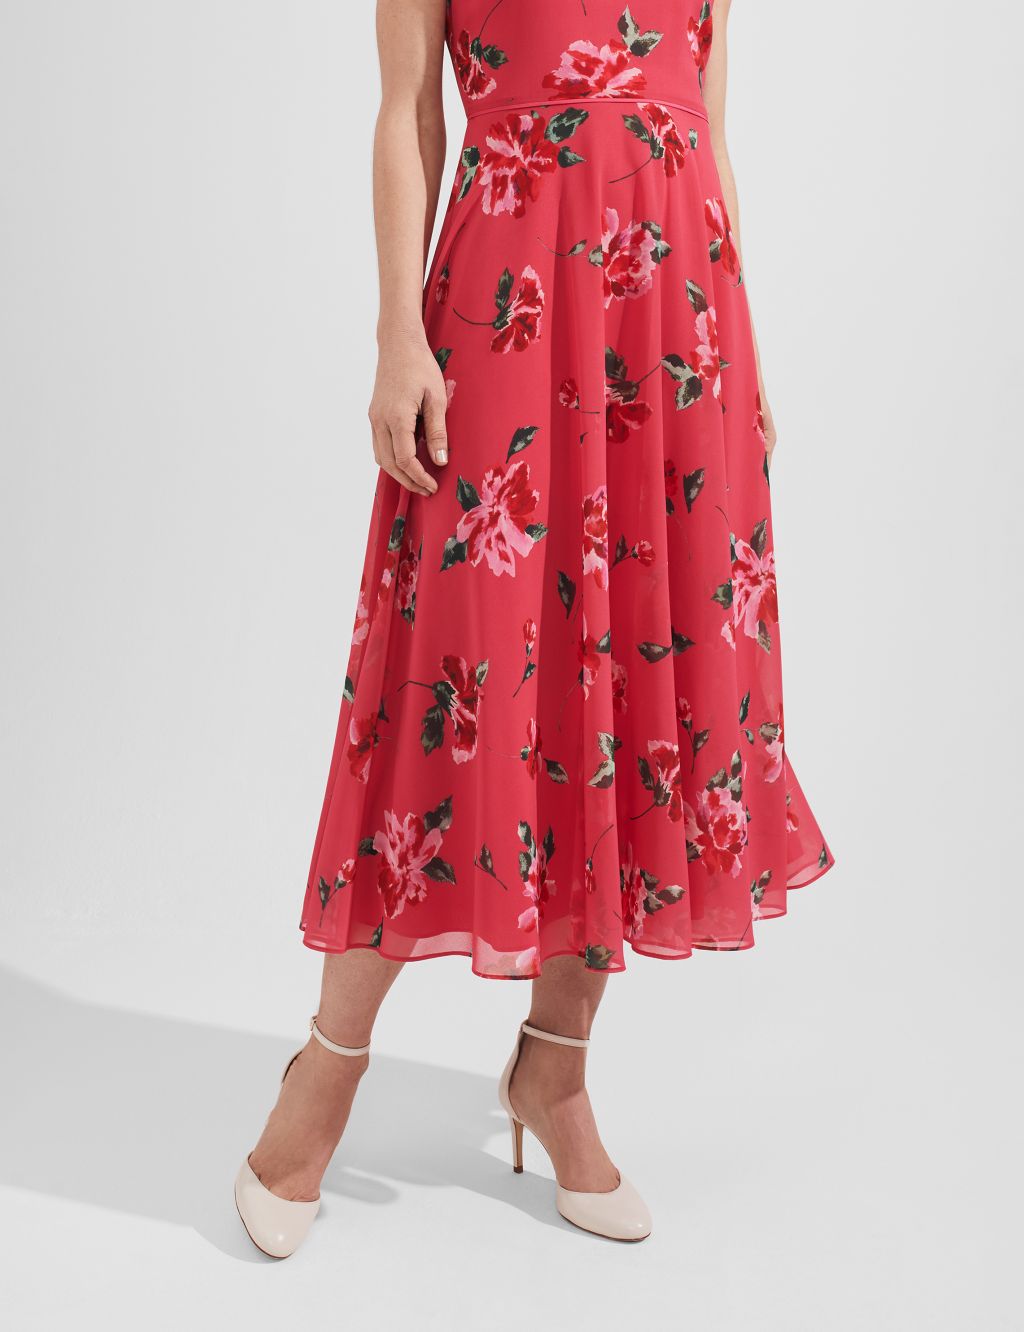 Floral Midaxi Swing Dress image 2